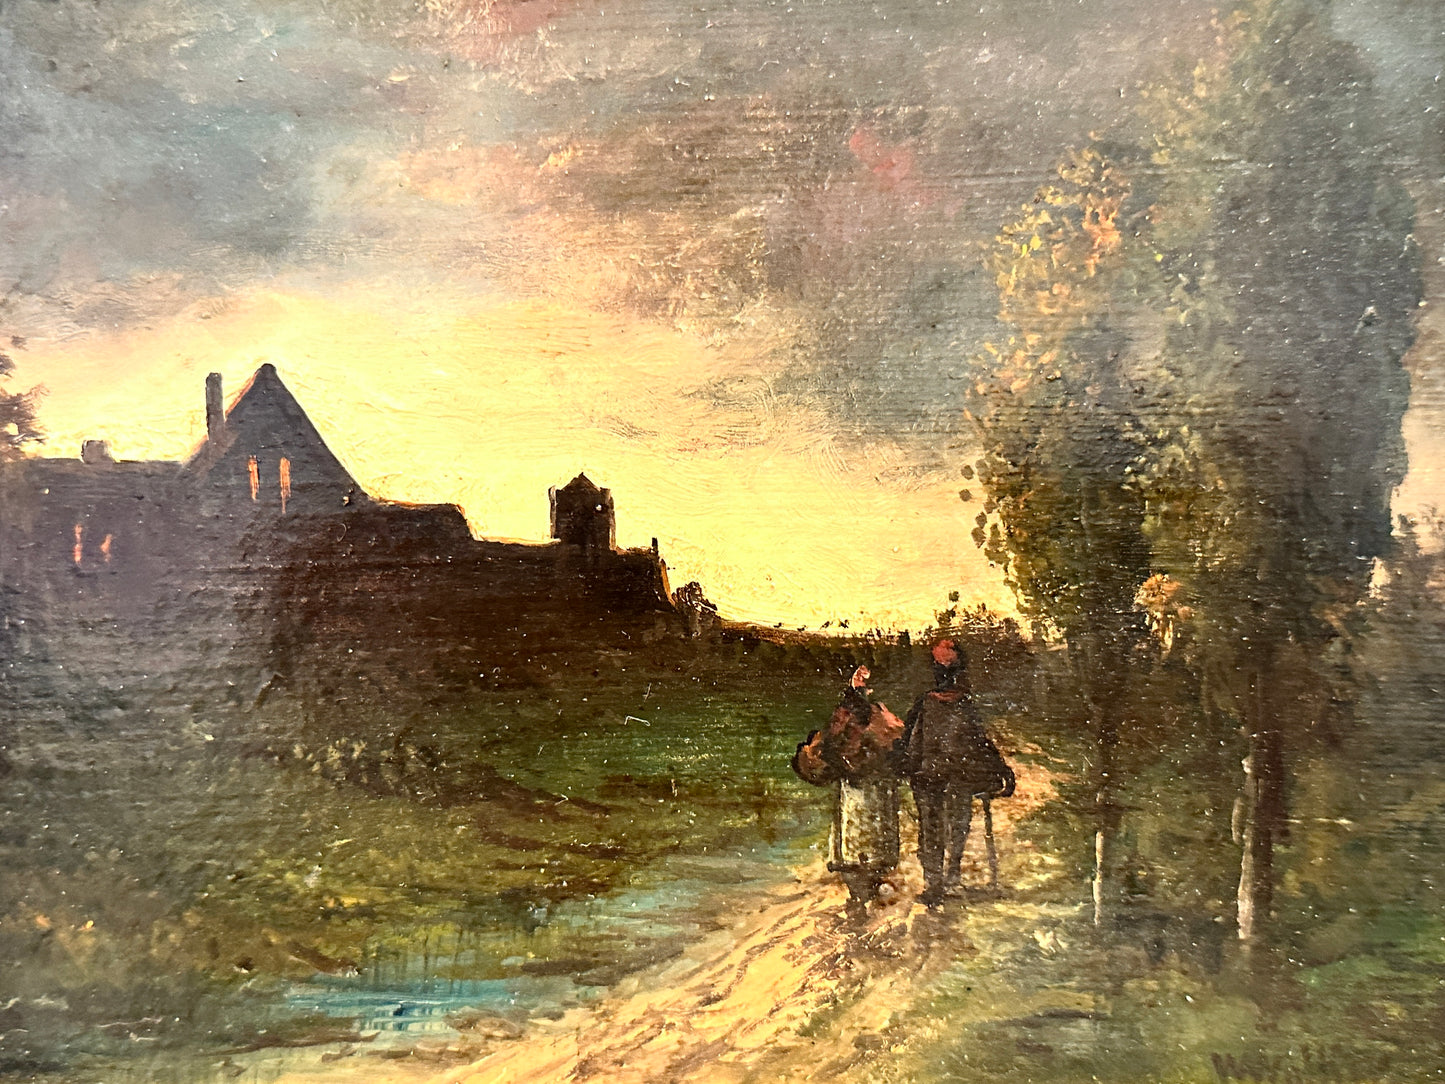 William Walker Oil Painting: Two workers walking on a path